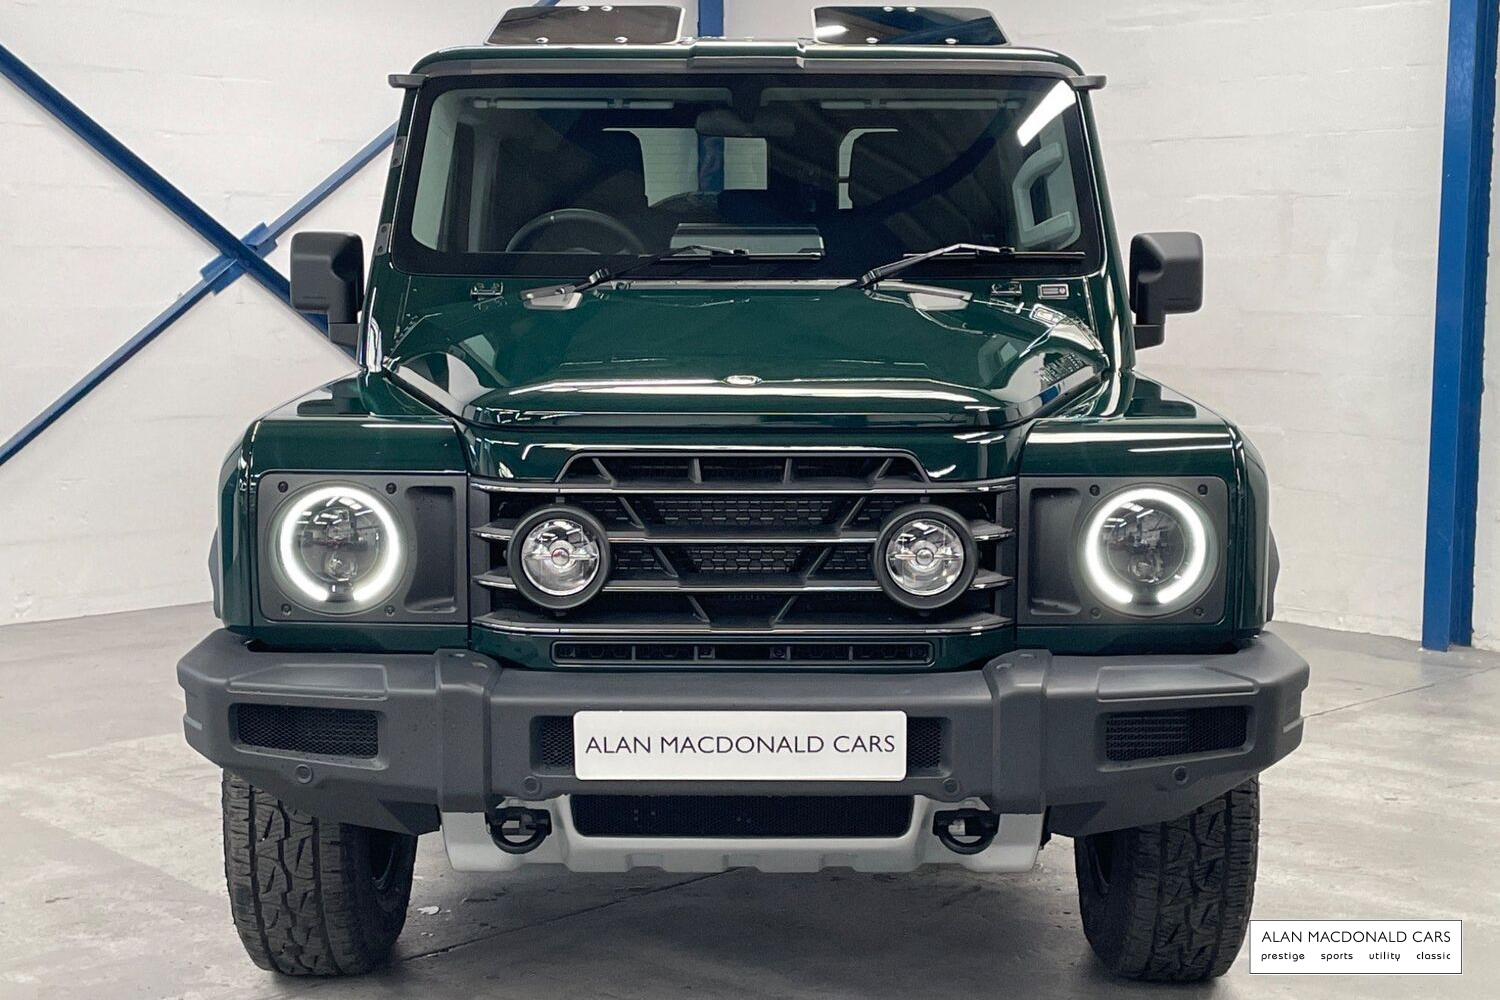 INEOS Grenadier 3.0P Fieldmaster Edition SUV 6dr Petrol Auto 4WD Euro 6  (s/s) (5Seat) (285 ps) - INEOS - Pre-owned Cars For Sale in Larbert - Alan  Macdonald Cars Ltd - Scotland's Specialist Car Dealer